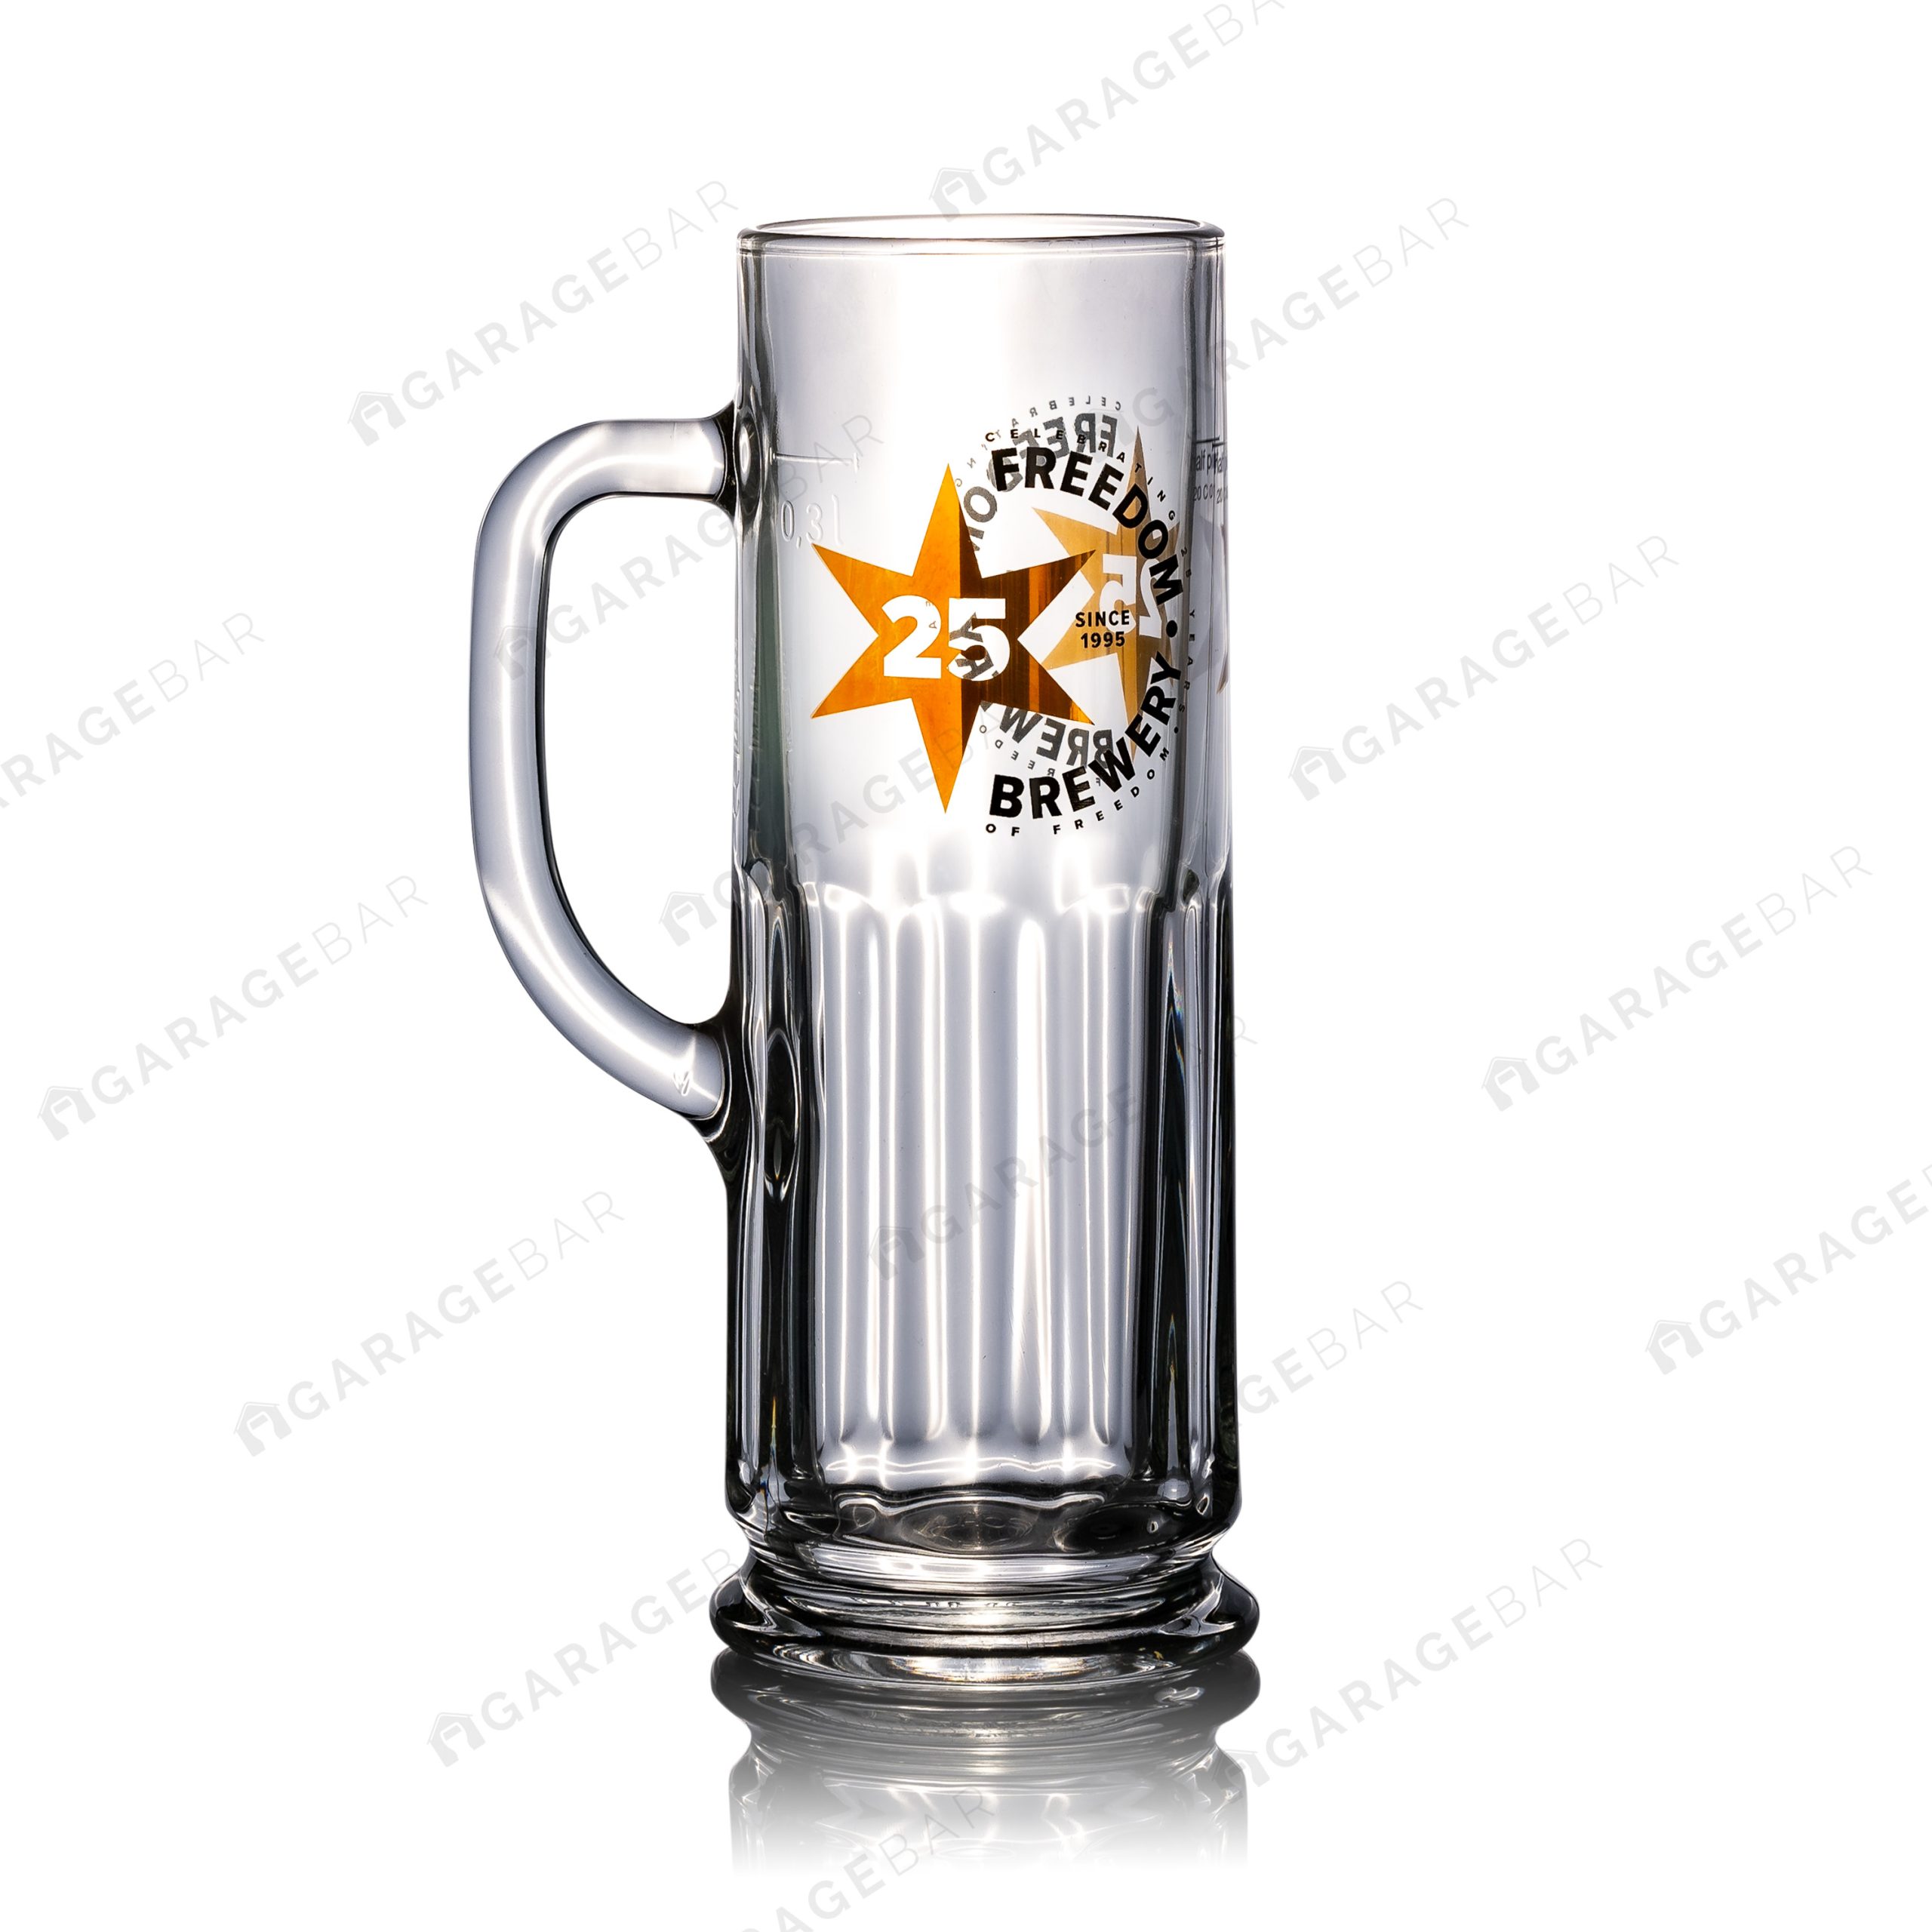 Freedom Brewery 25th Anniversary Beer Glass